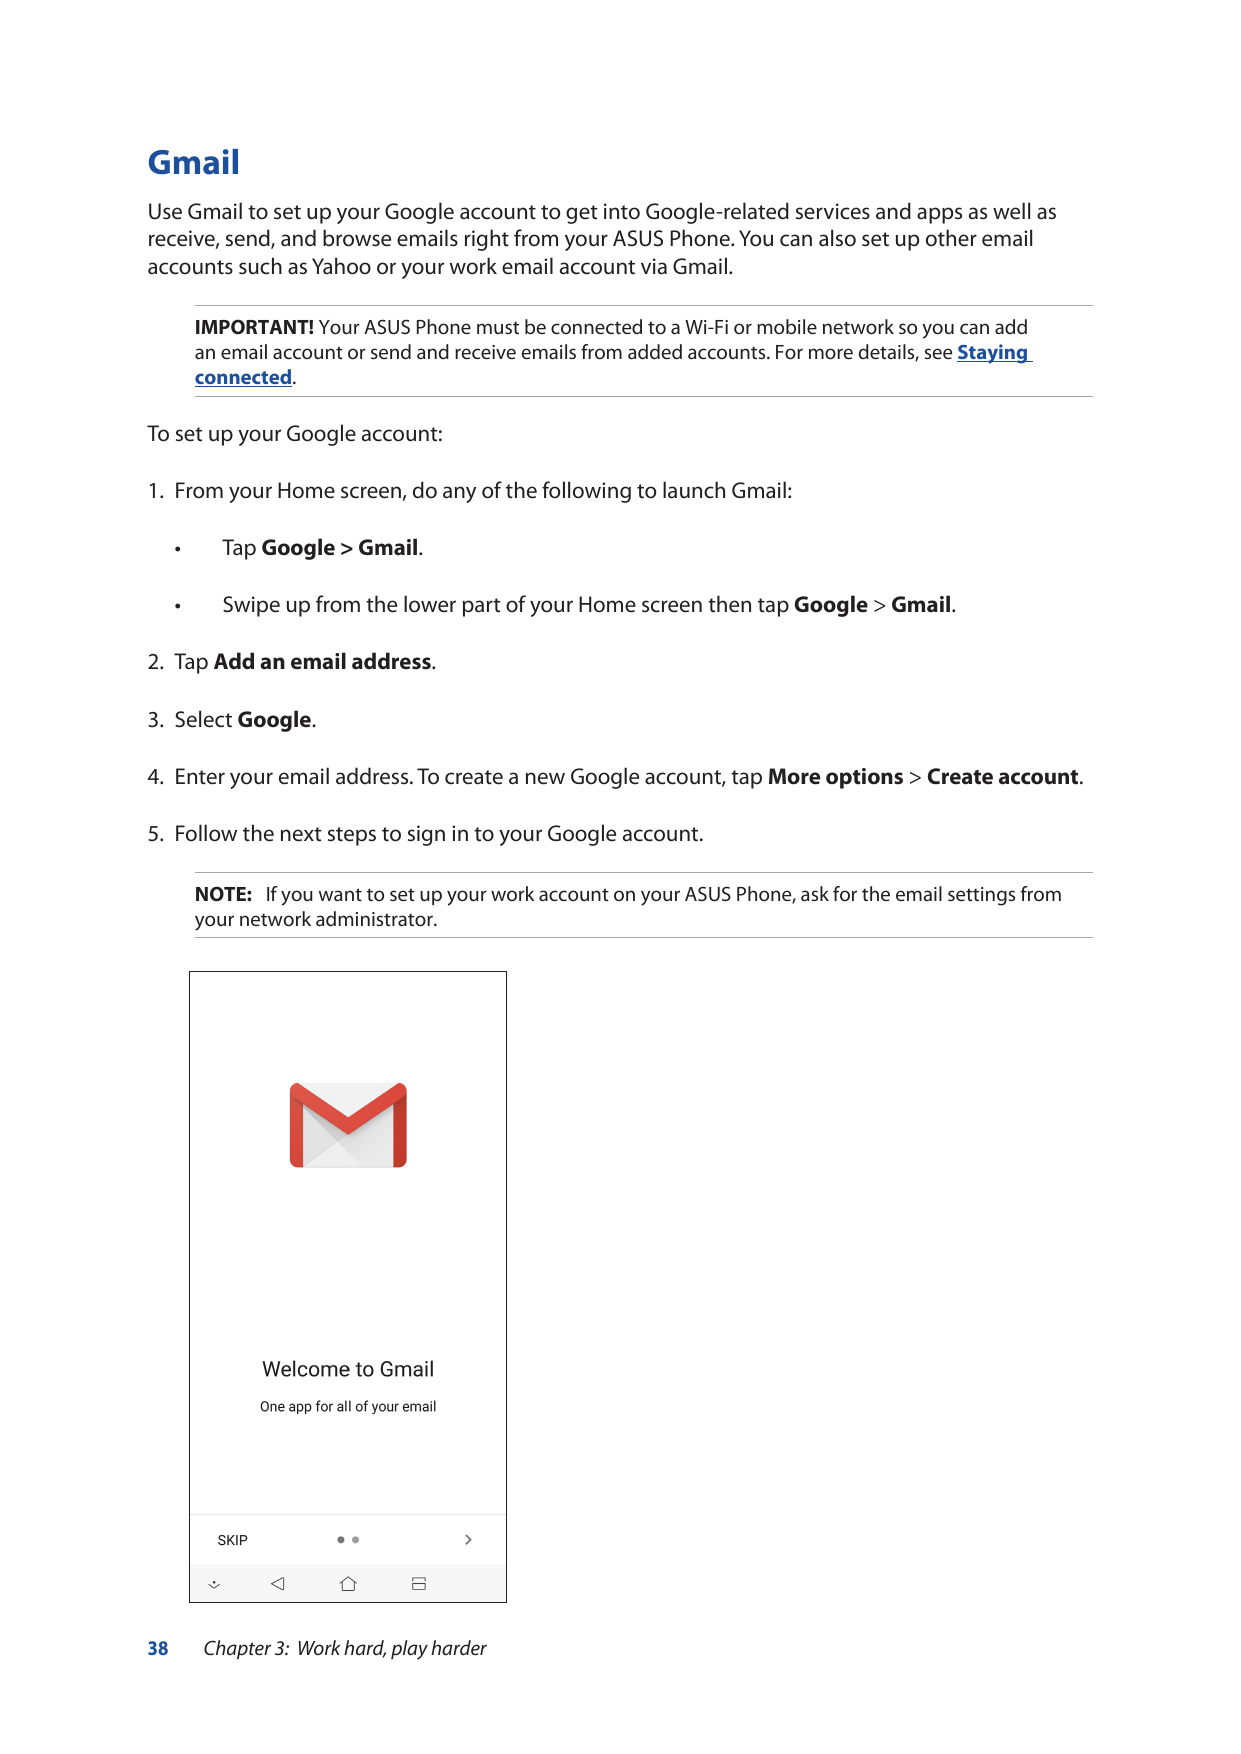 GmailUse Gmail to set up your Google account to get into Google-related services and apps as well asreceive, send, and browse em